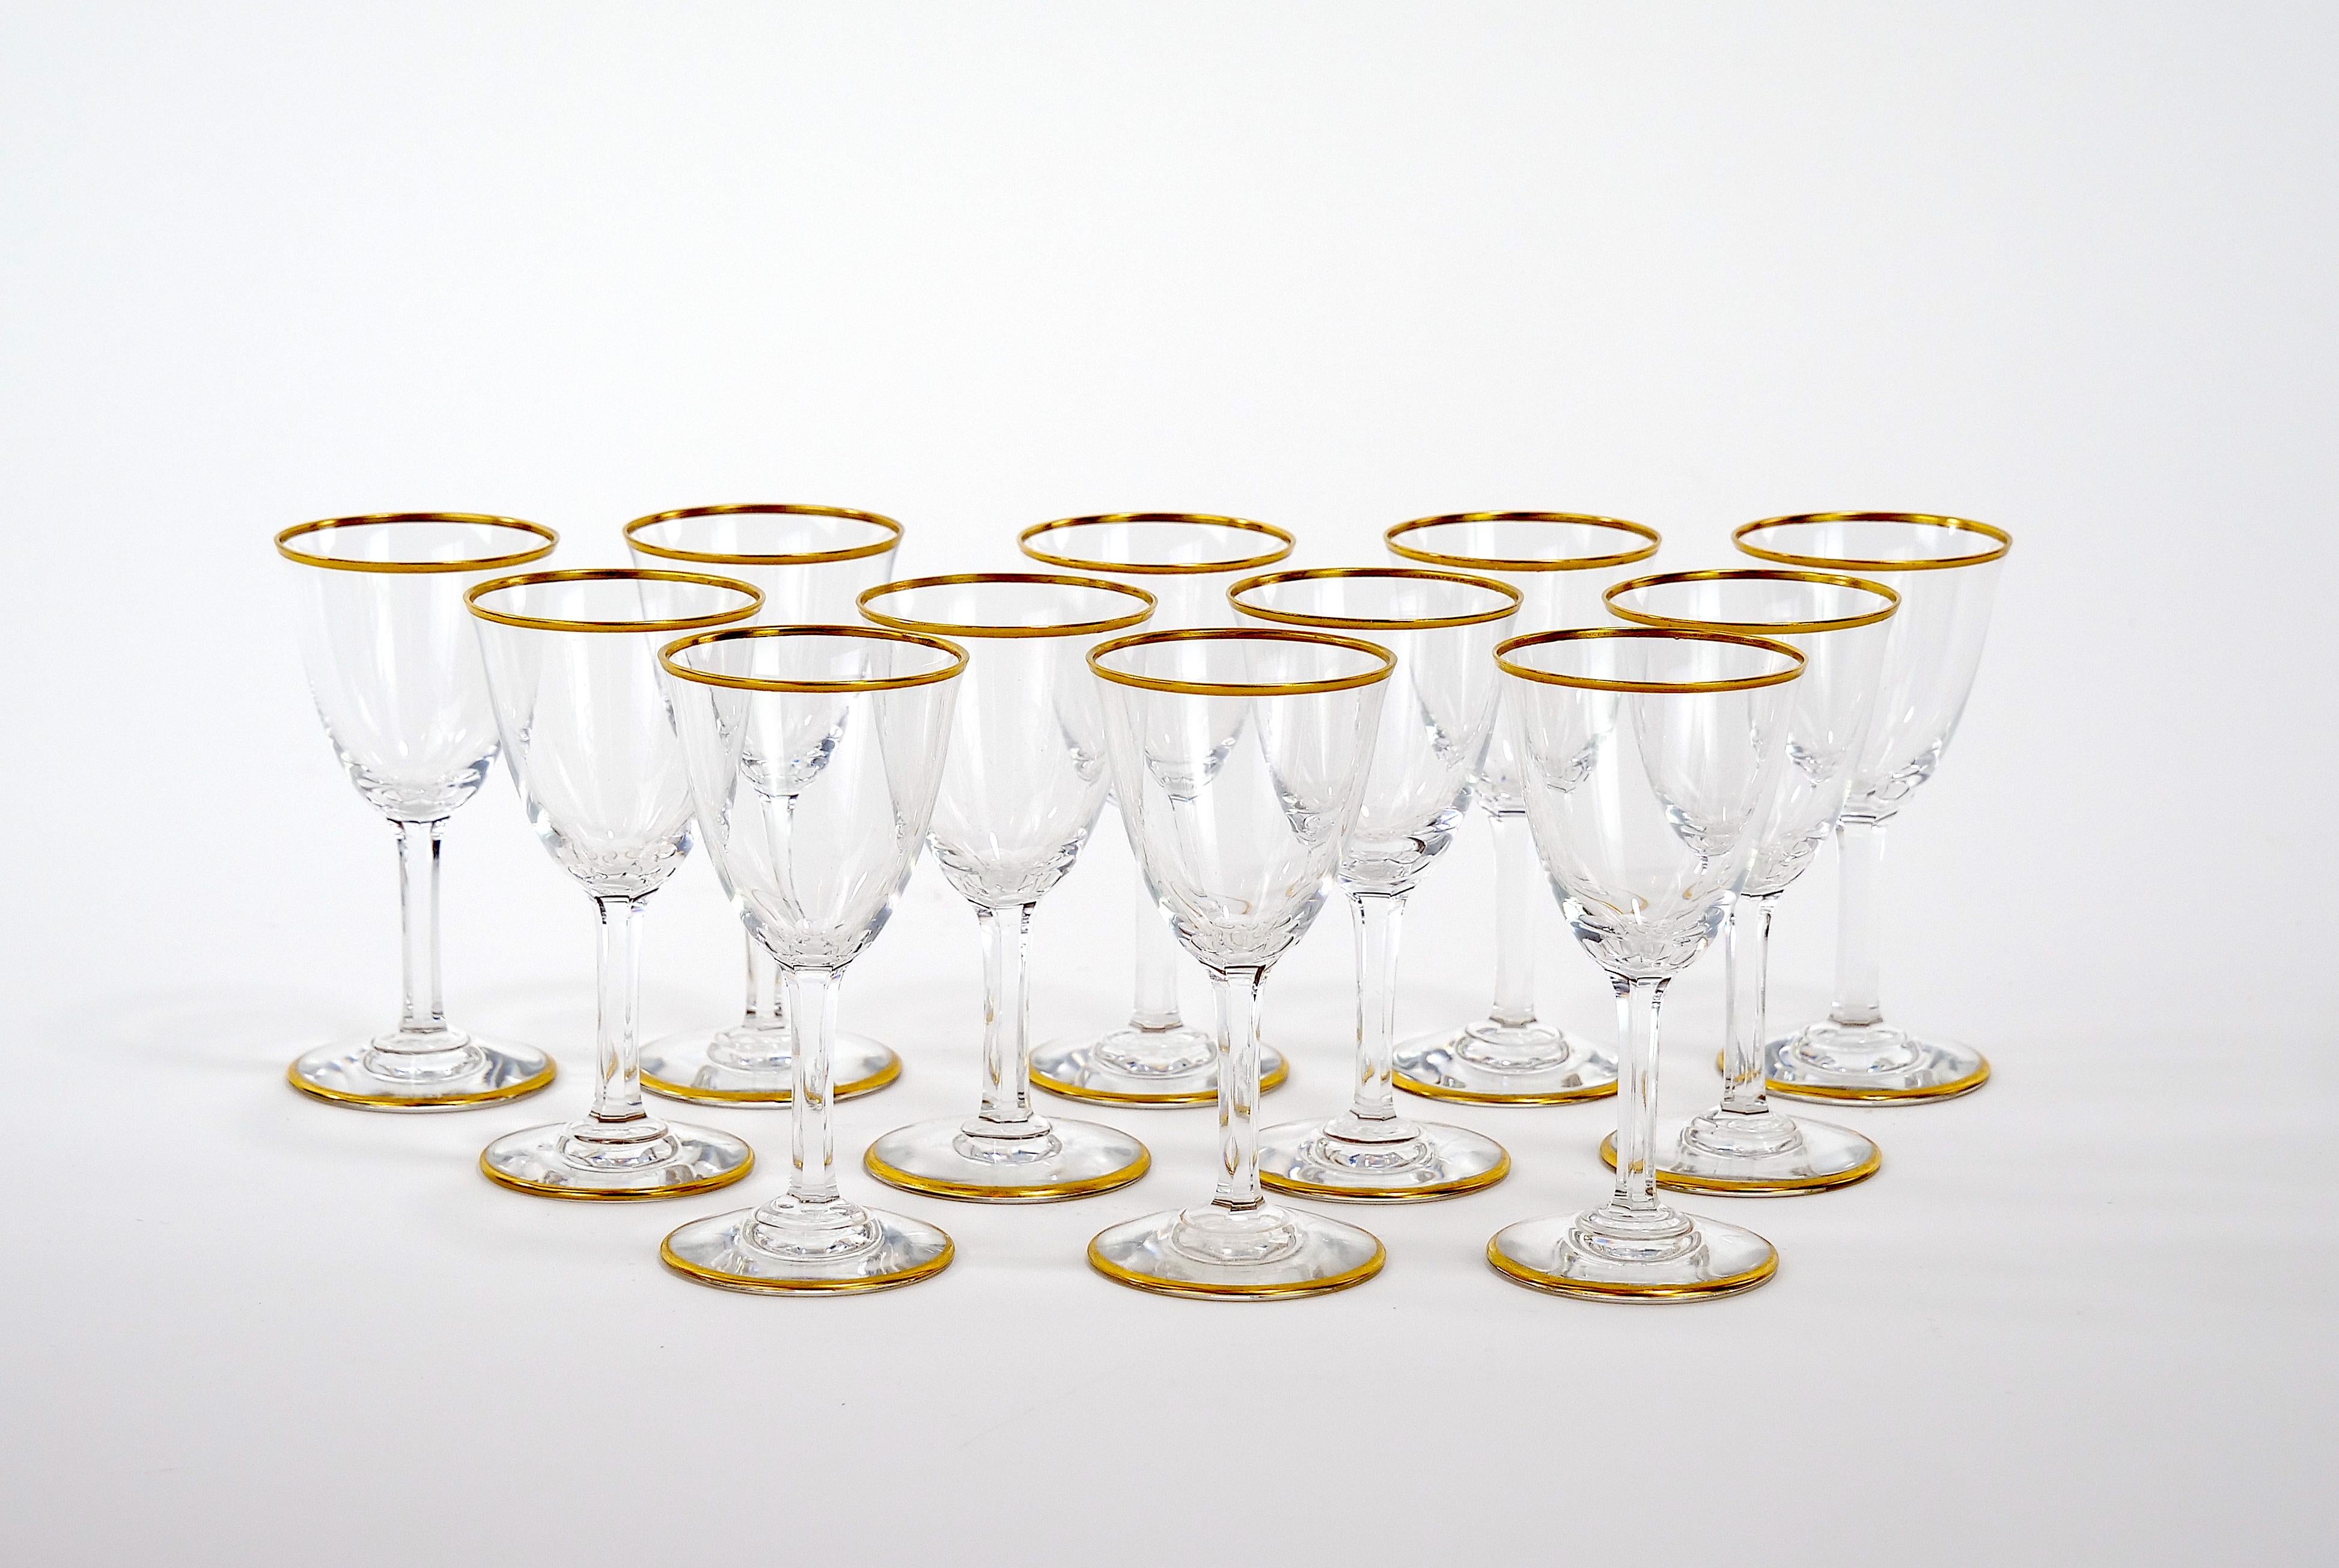 French Baccarat Crystal Liquor / Sherry Glassware Service / 12 People For Sale